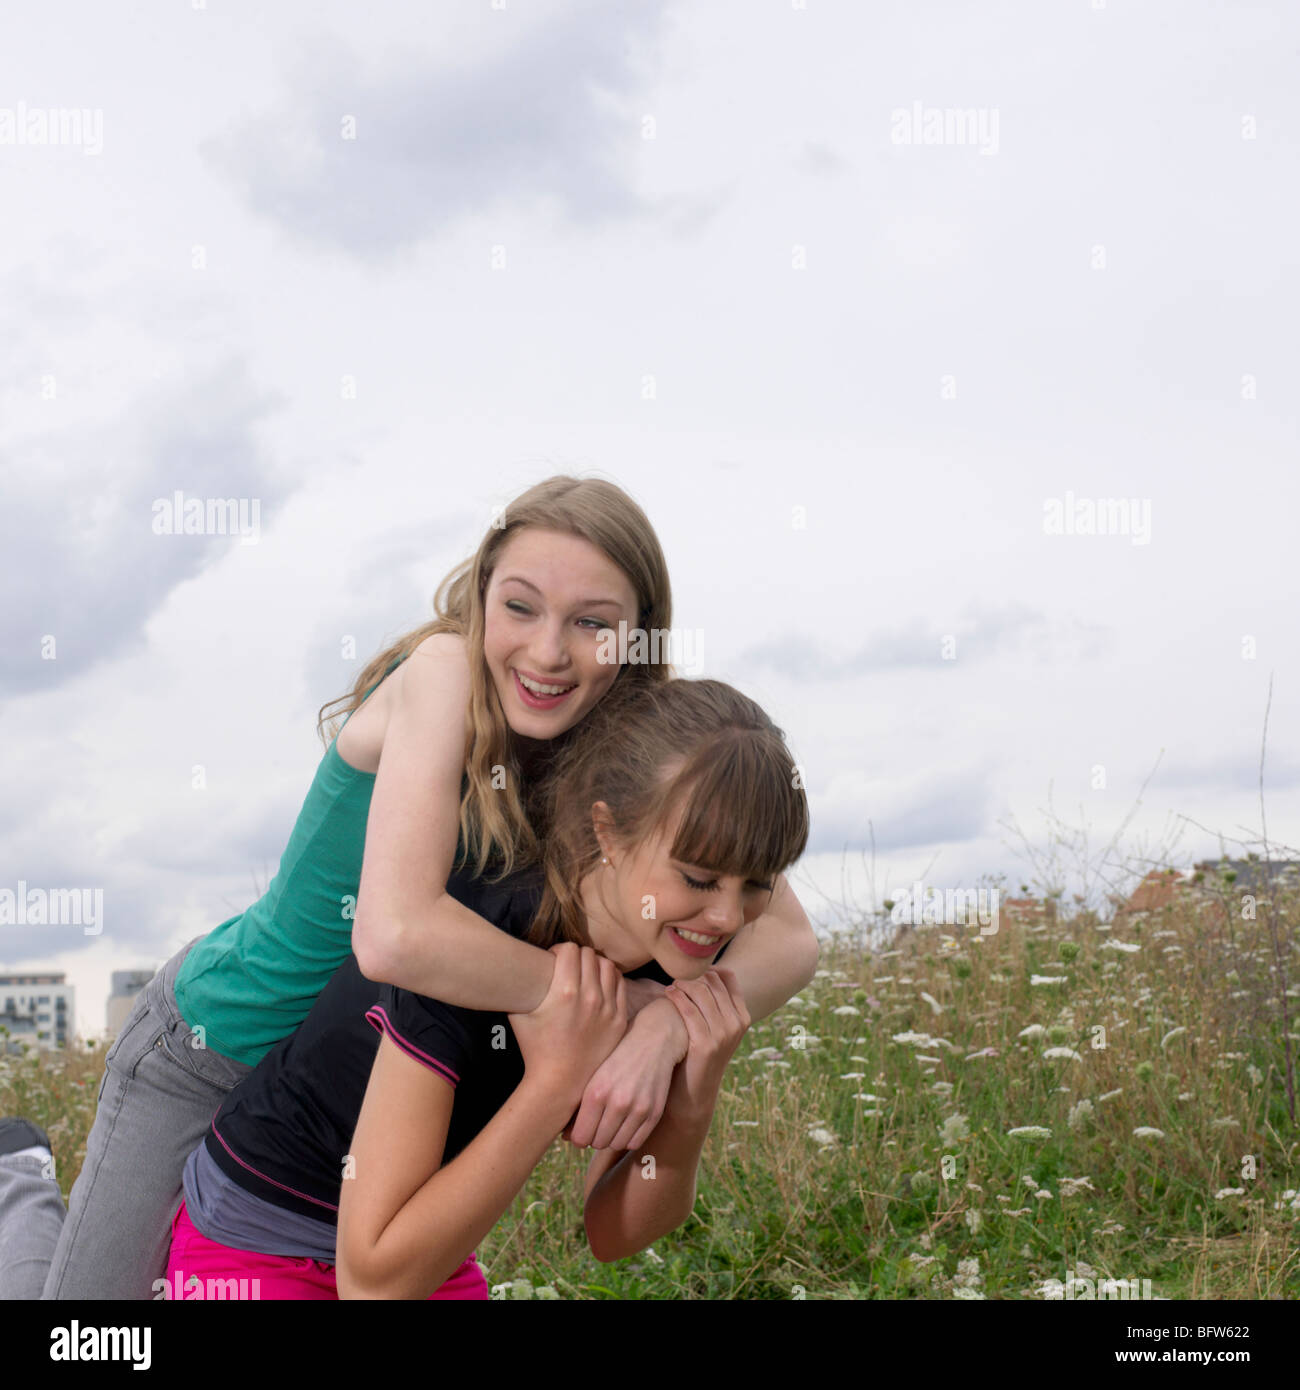 2 young women fooling around Stock Photo